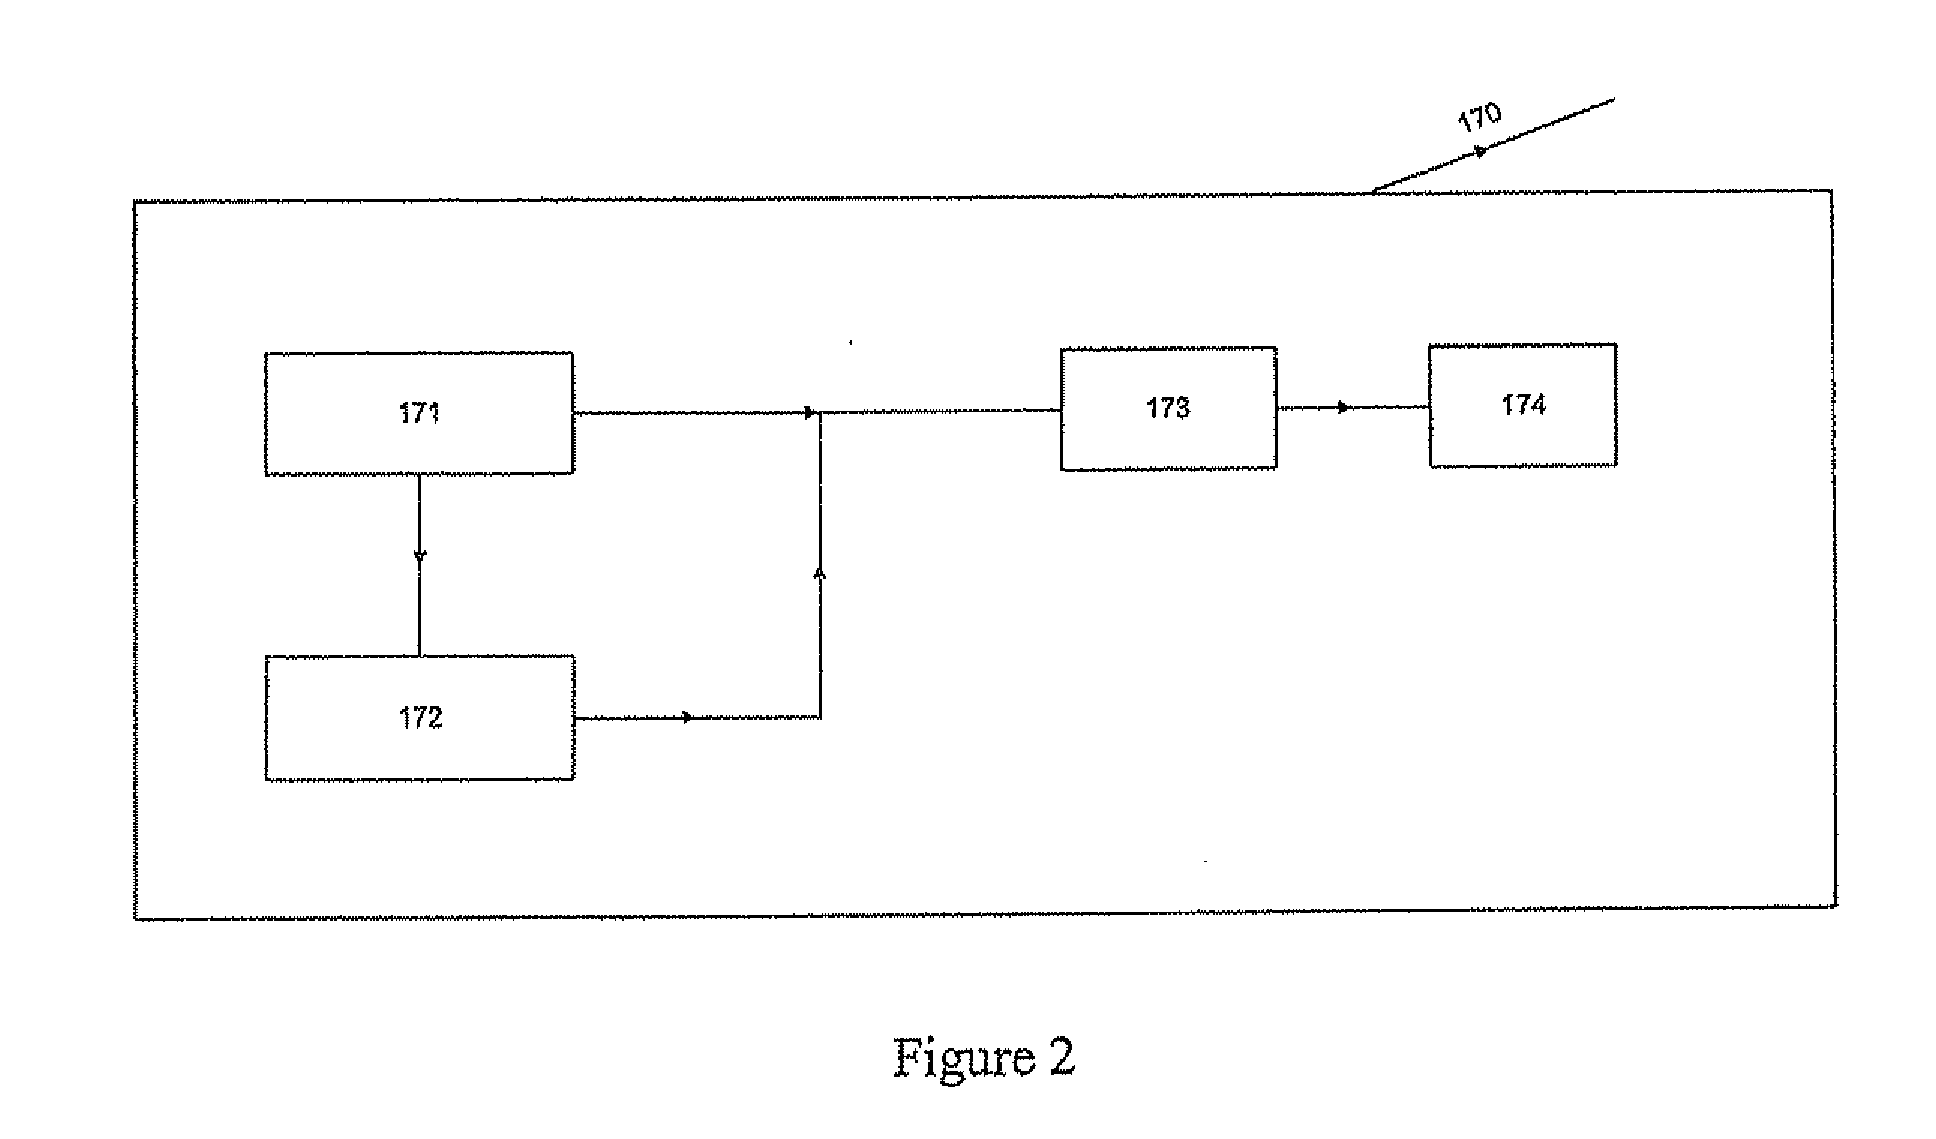 Motion detector for detecting tampering and method for detecting tampering